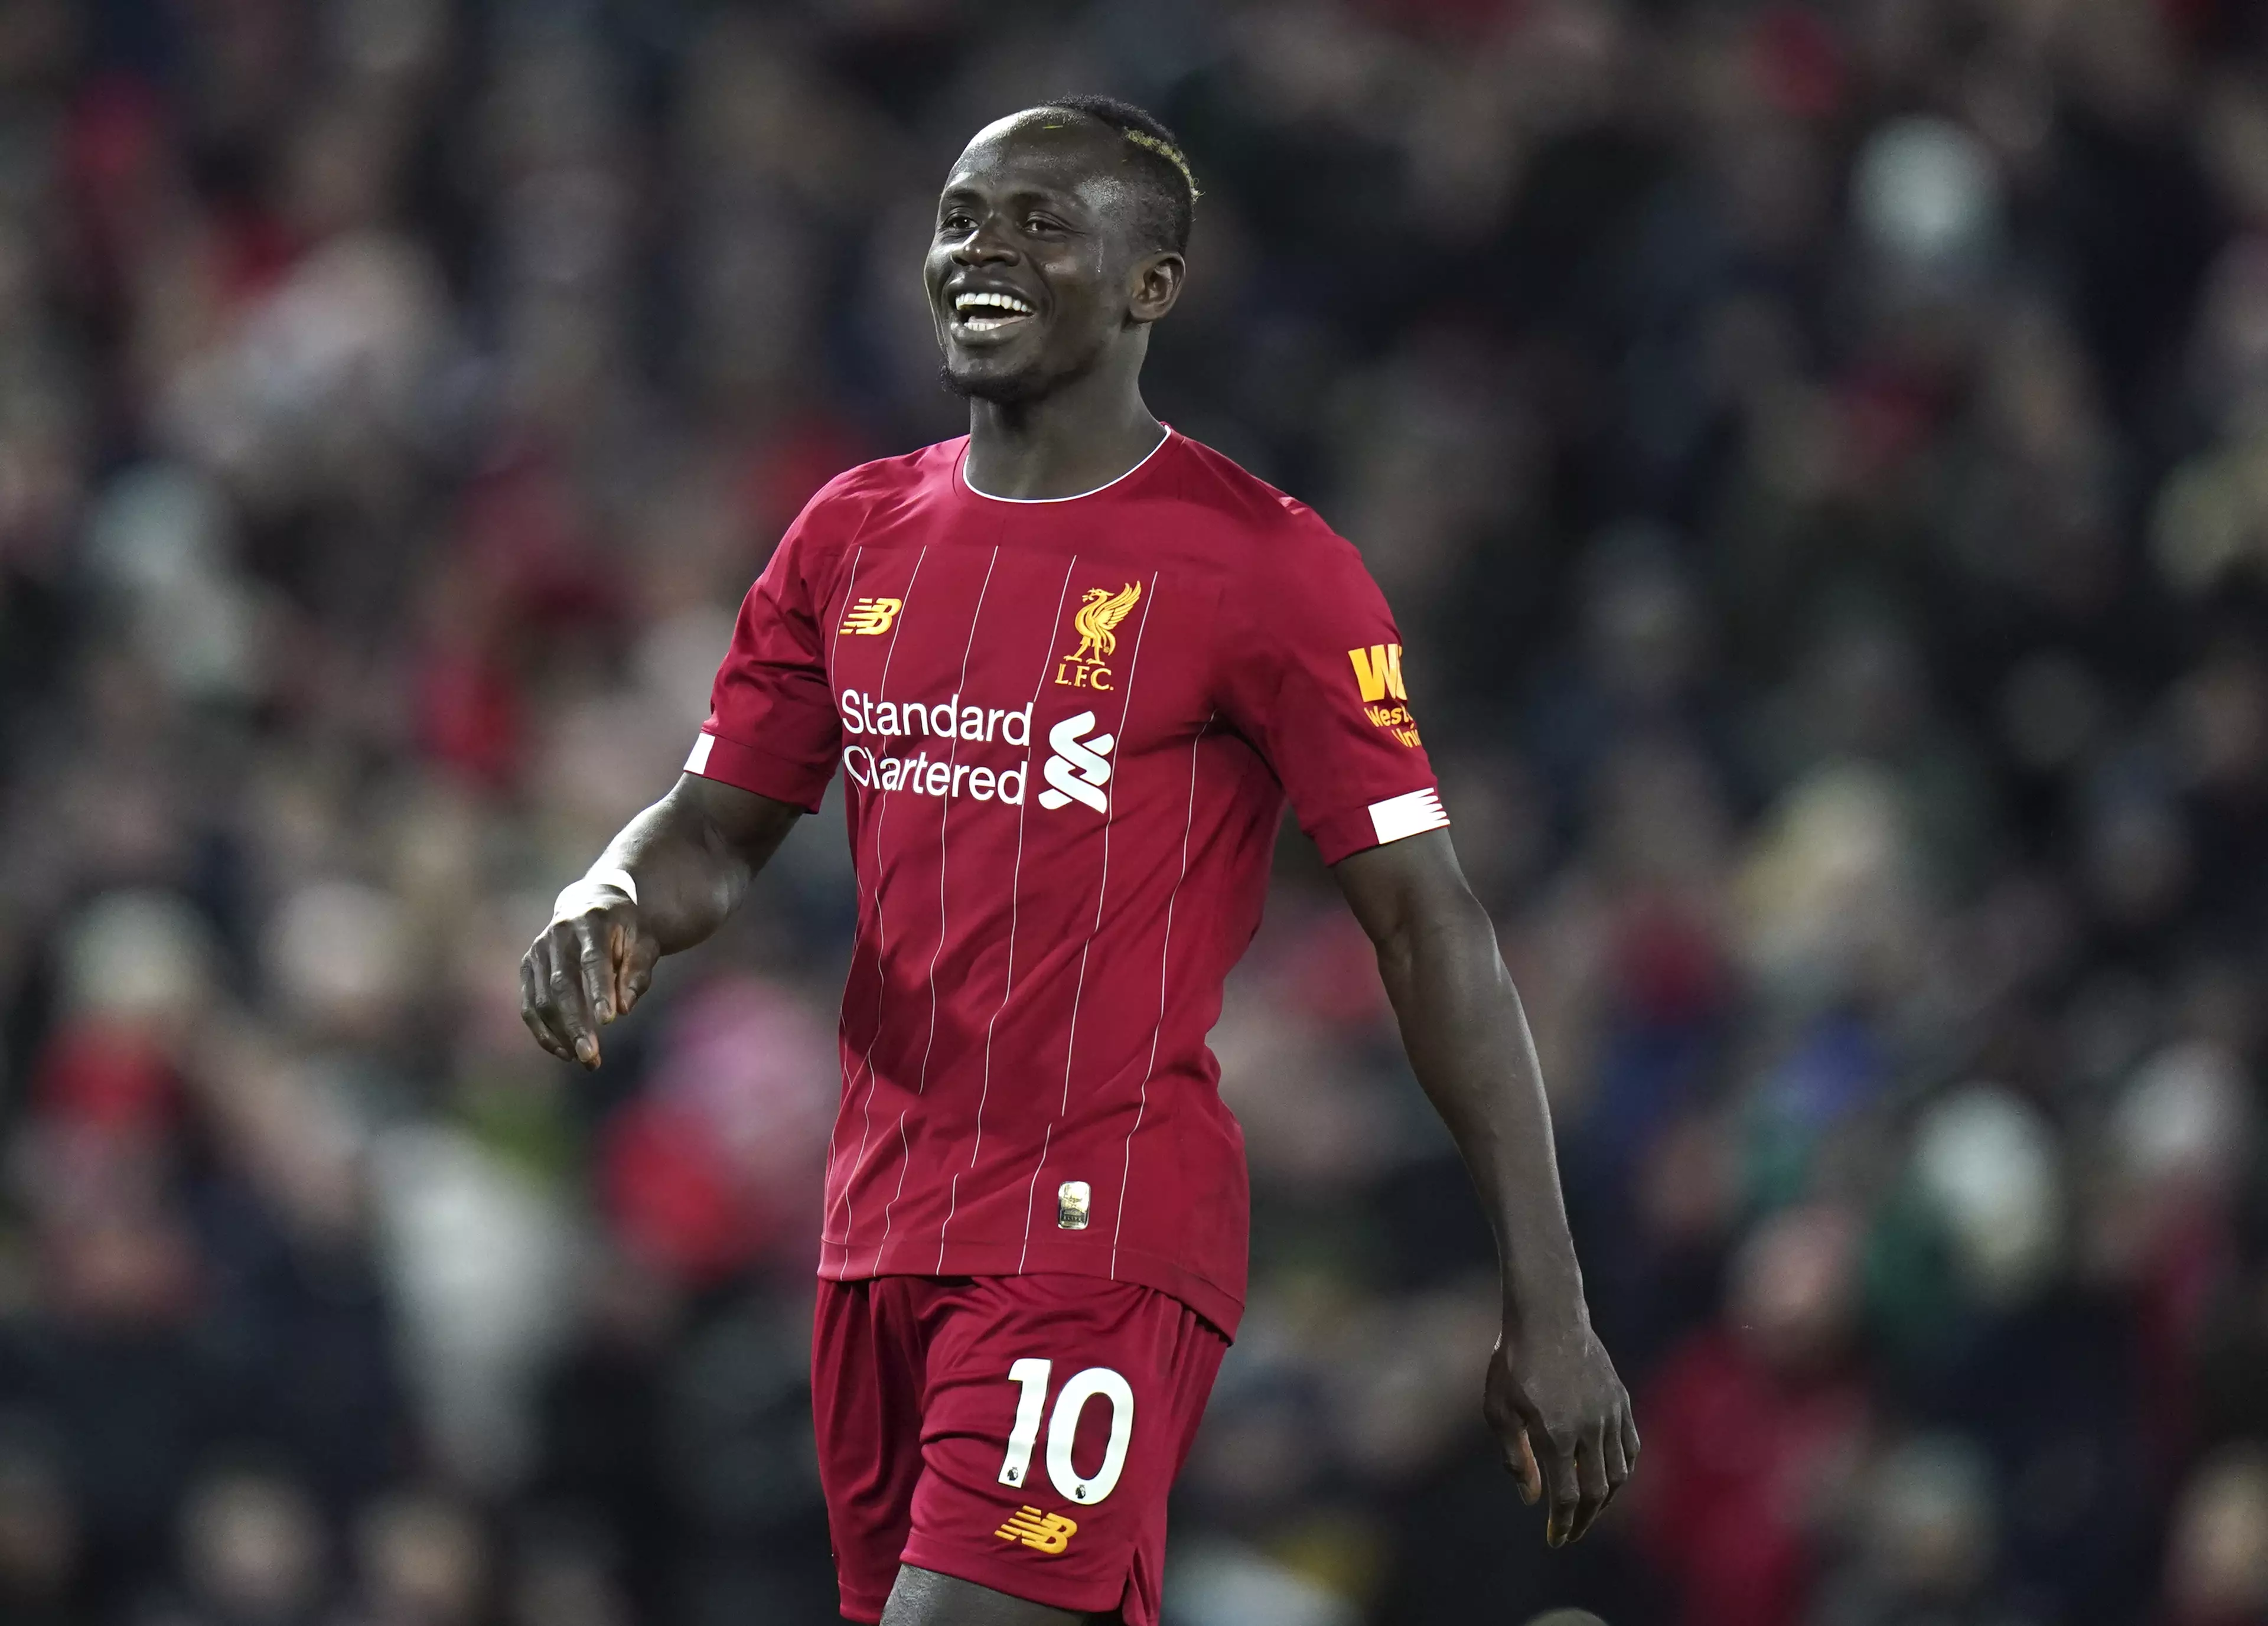 Mane has been brilliant for Liverpool. Image: PA Images